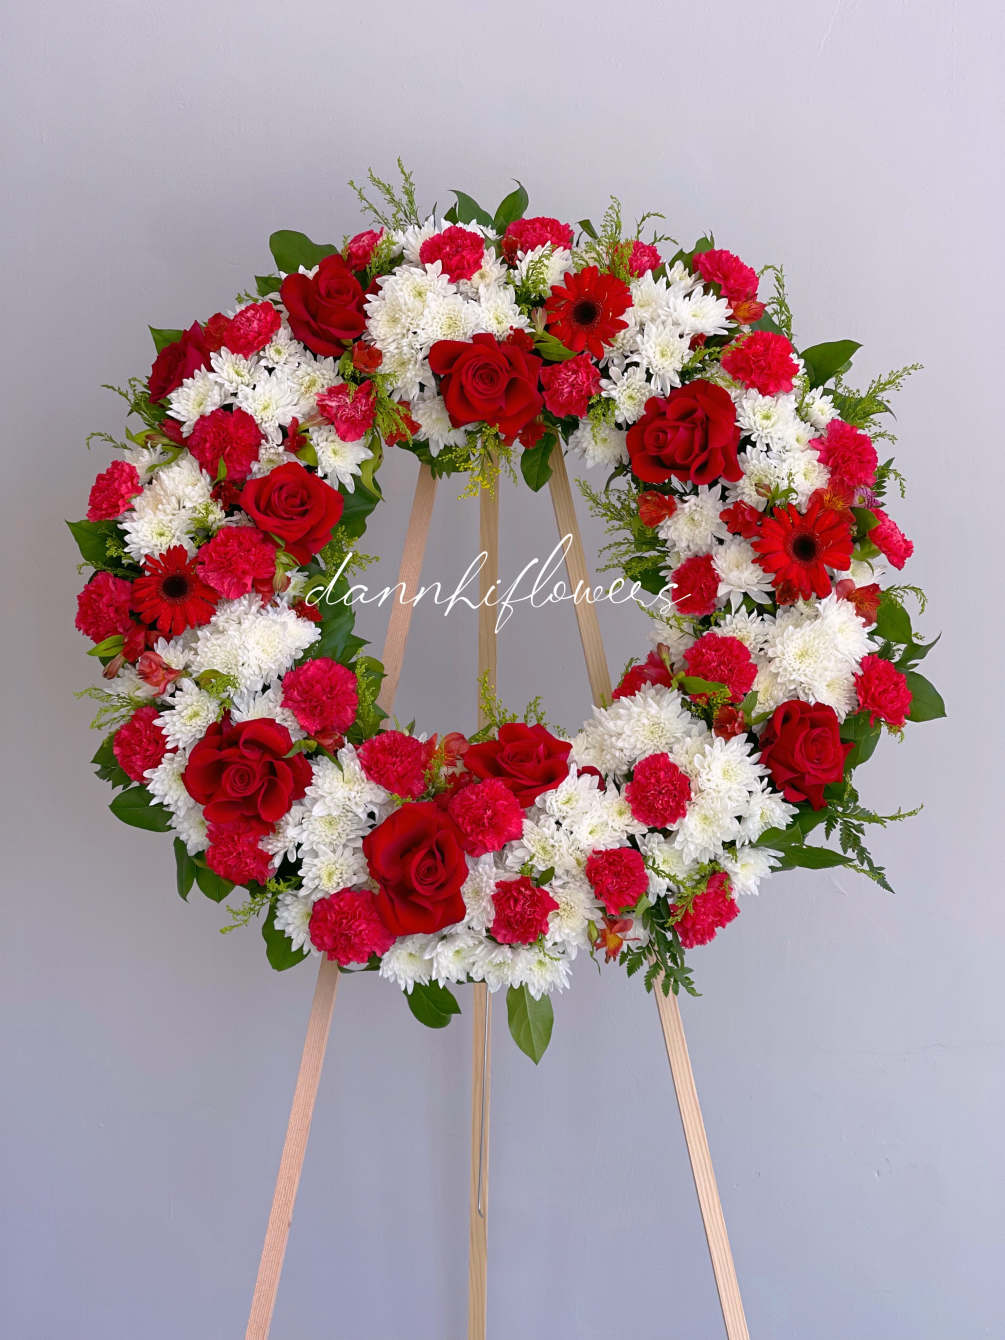 Mix flowers of red and white, Photo is Standard size. Deluxe will